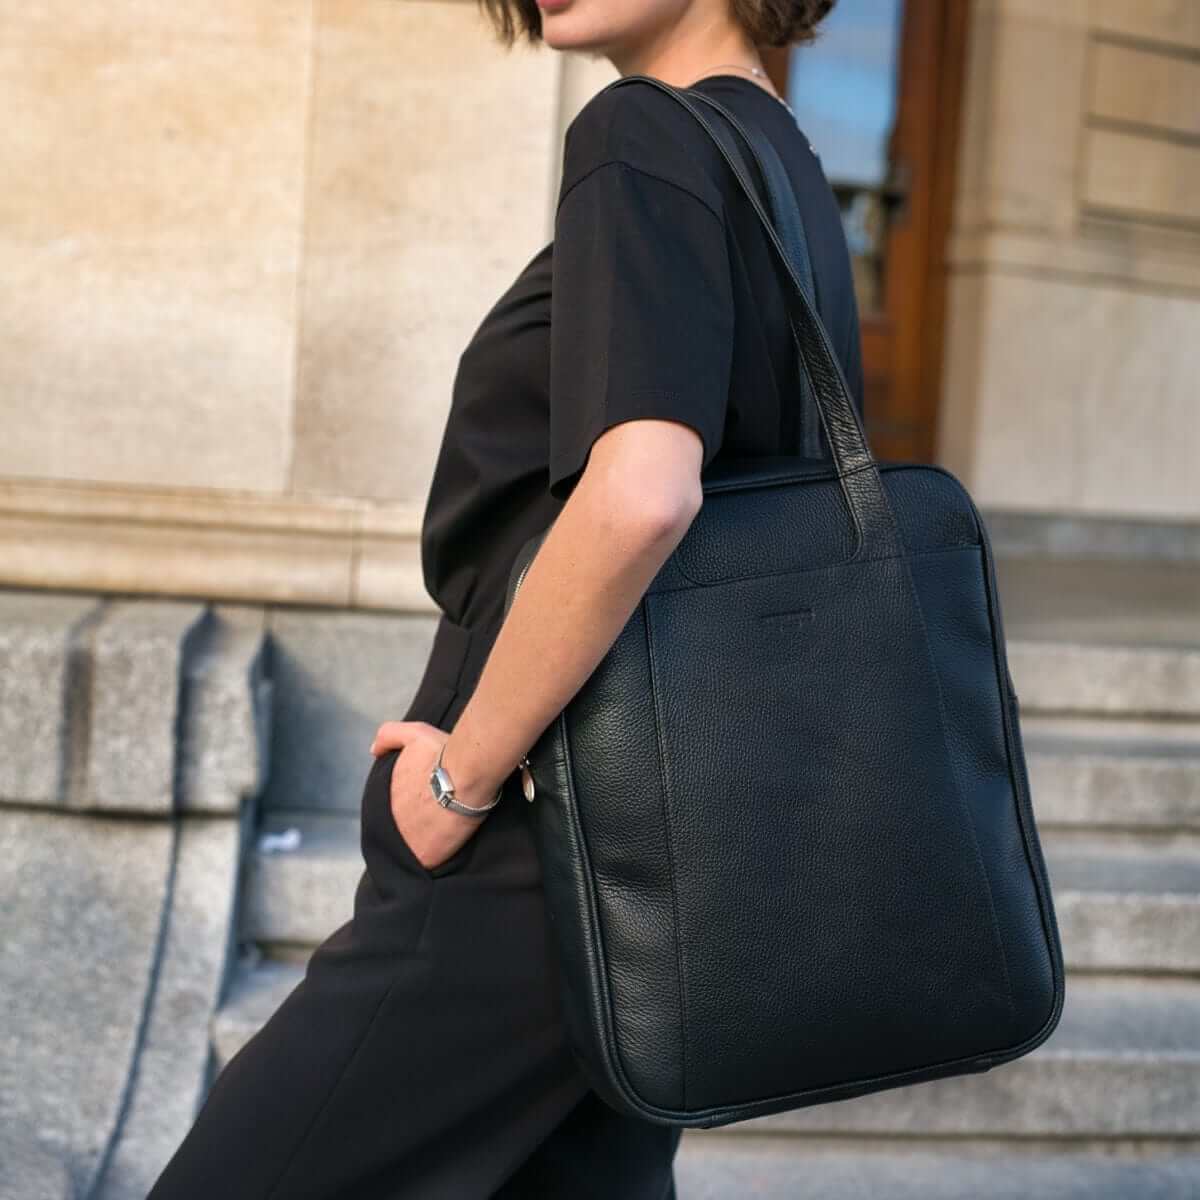 A stylish full-grain leather tote bag, the Arsante Iconica, with its long ergonomic shoulder straps, perfect for carrying all your essentials while travelling.